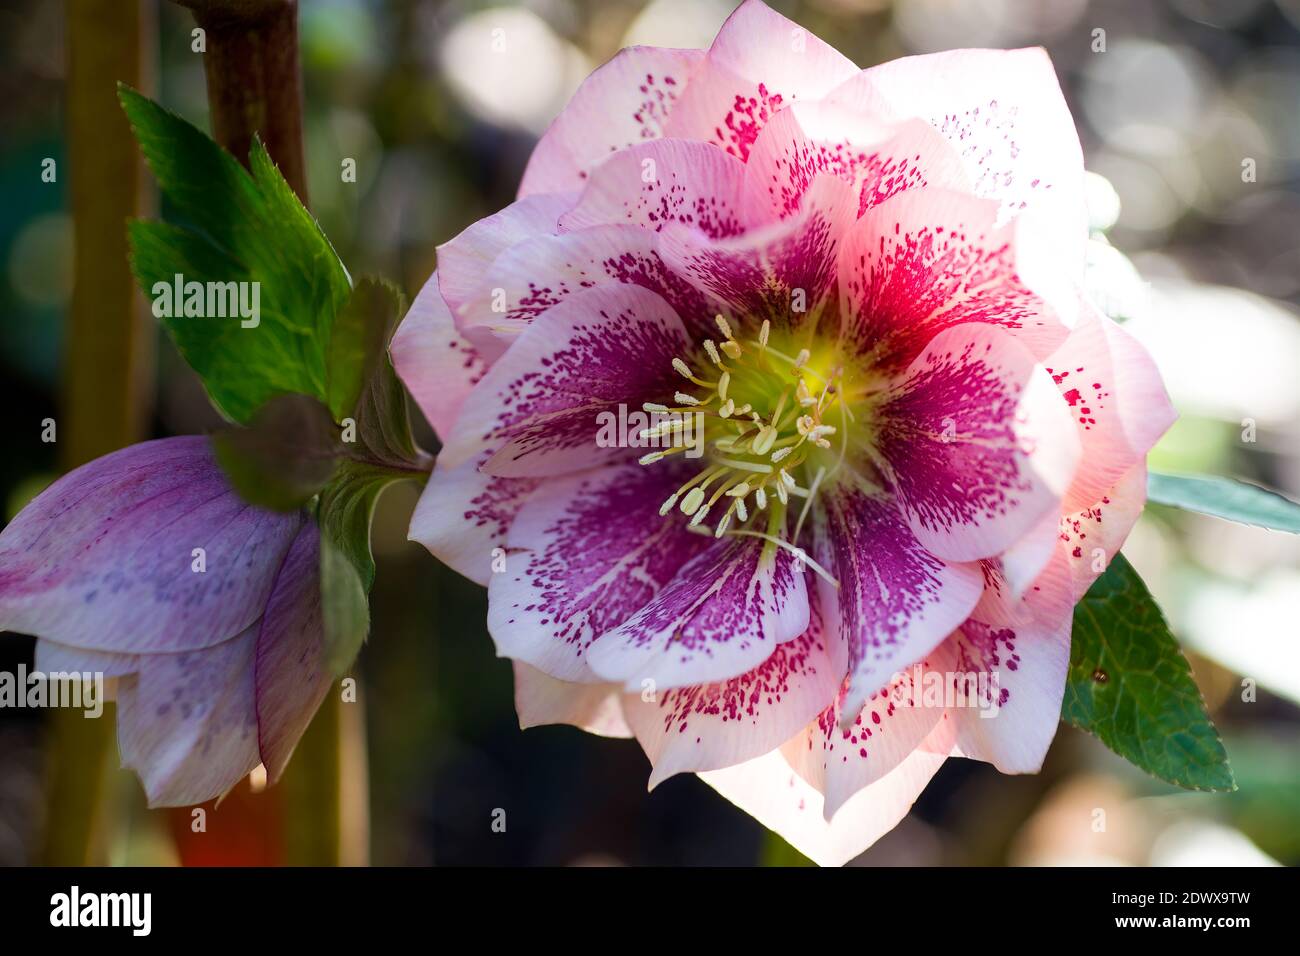 Hybrid hellebore (HELLEBORUS HYBRIDUS) double pink with dots of fuchsia color, green and blurry background Stock Photo